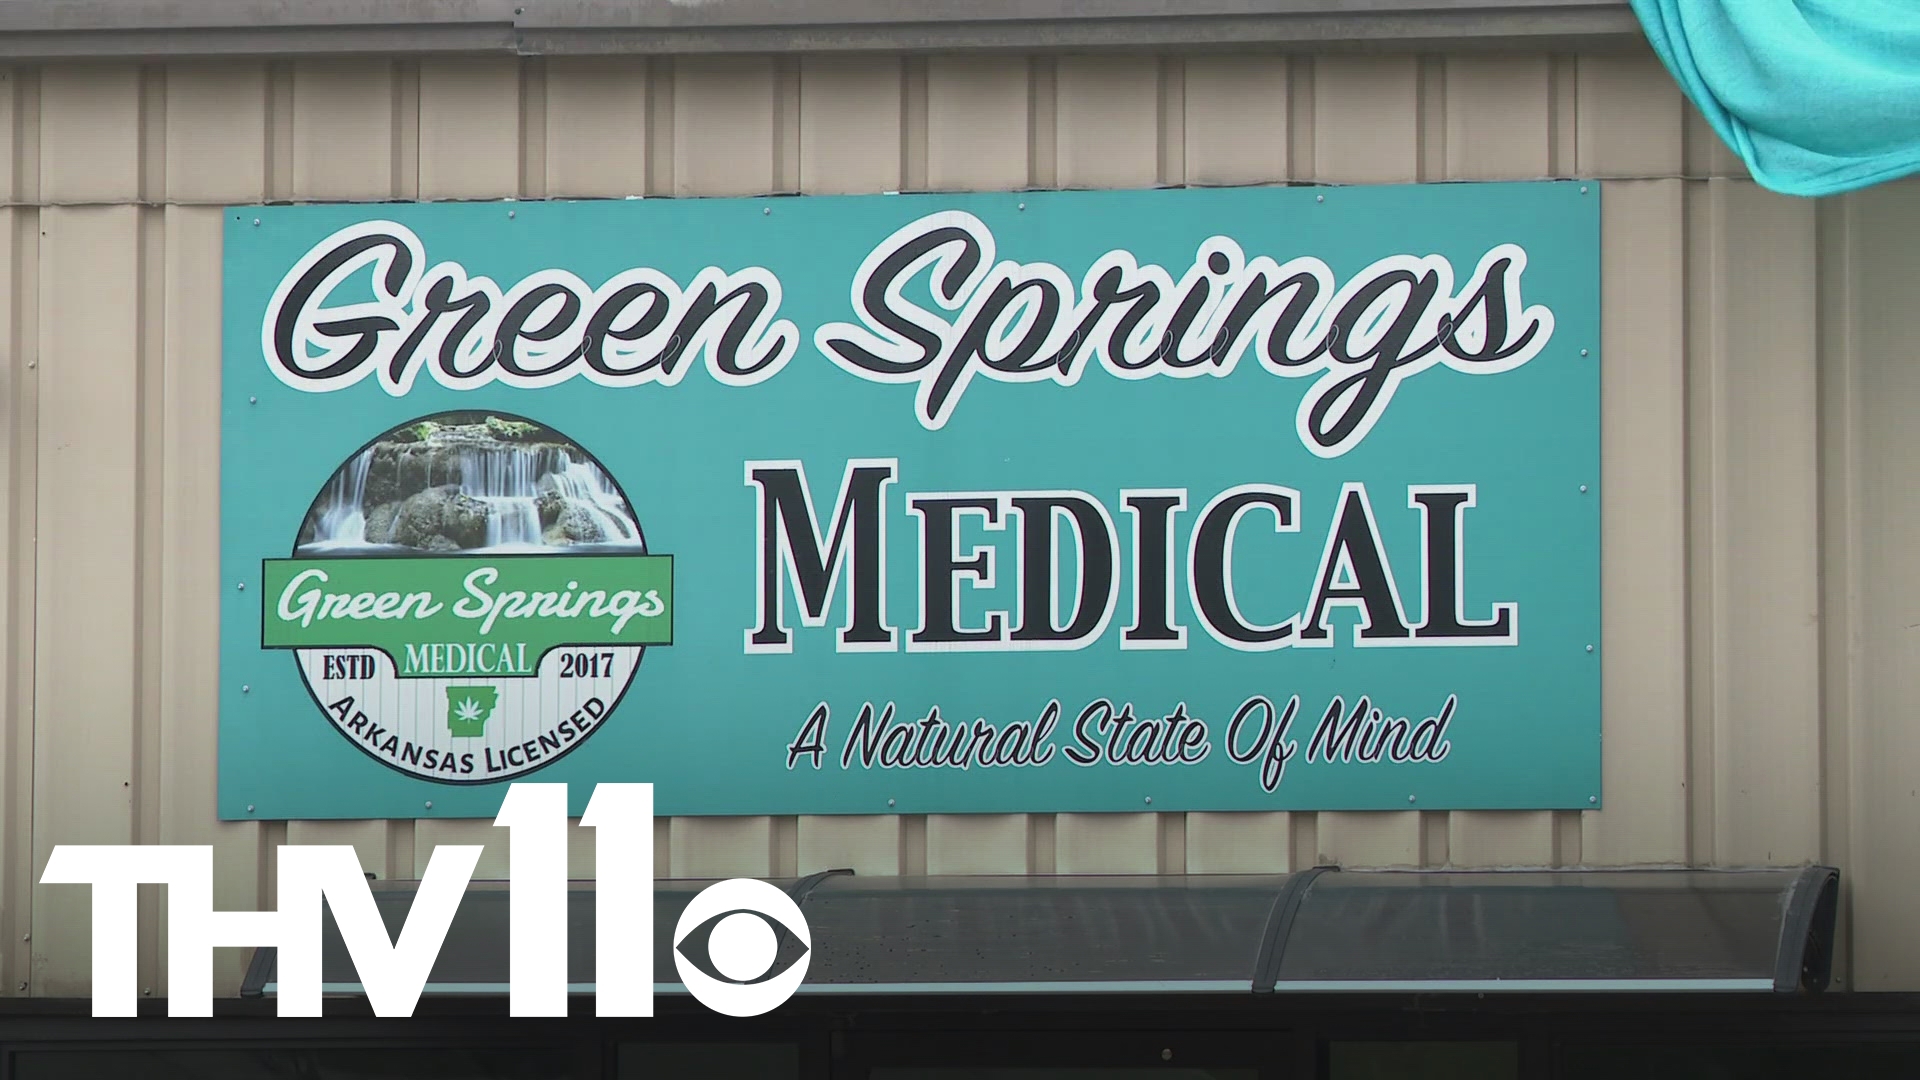 A Garland County Circuit Court judge denied Green Springs Medical's request to temporarily reopen as it "willfully committed violations."